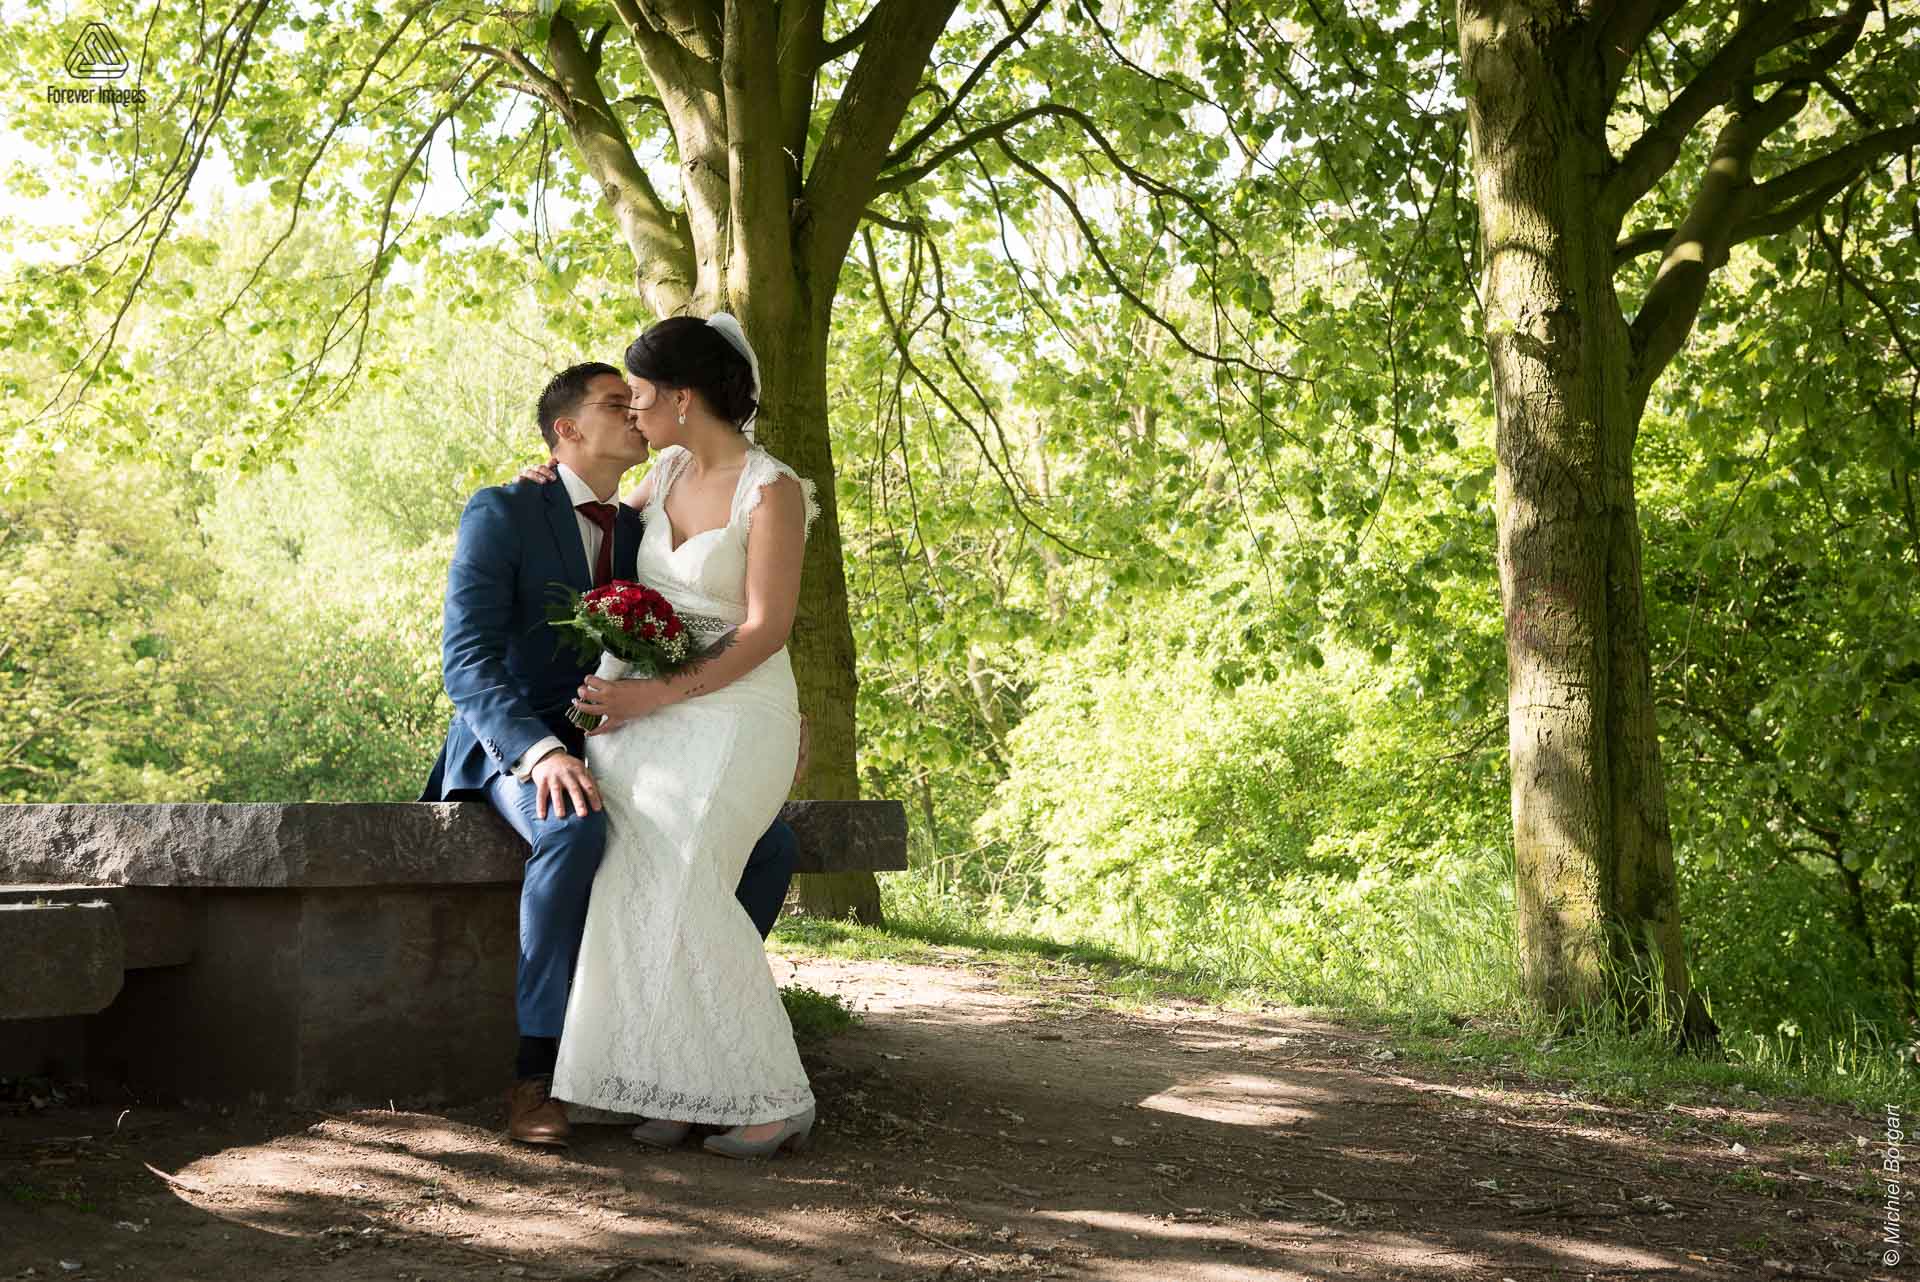 Bridal photo wedding couple sitting on the hill in the Oudegein park in Nieuwegein | Kevin Leonie | Wedding Photographer Michiel Borgart - Forever Images.